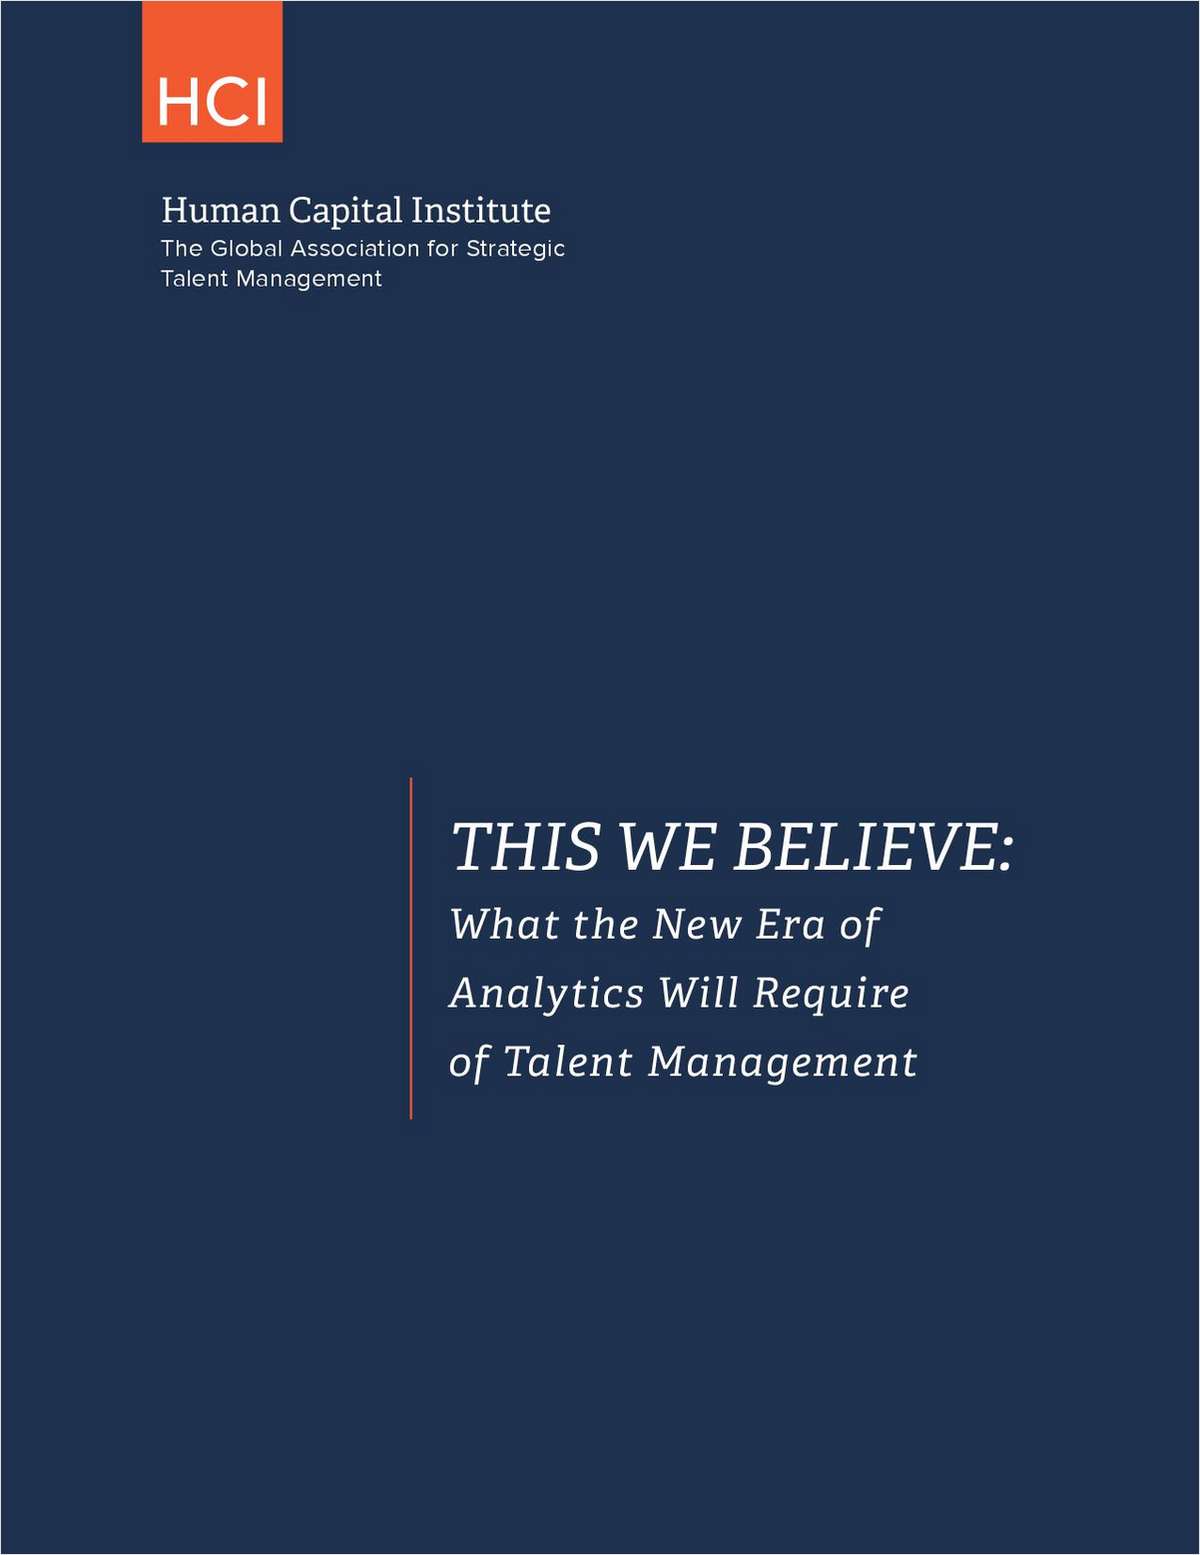 What the New Era of Analytics Will Require of Talent Management